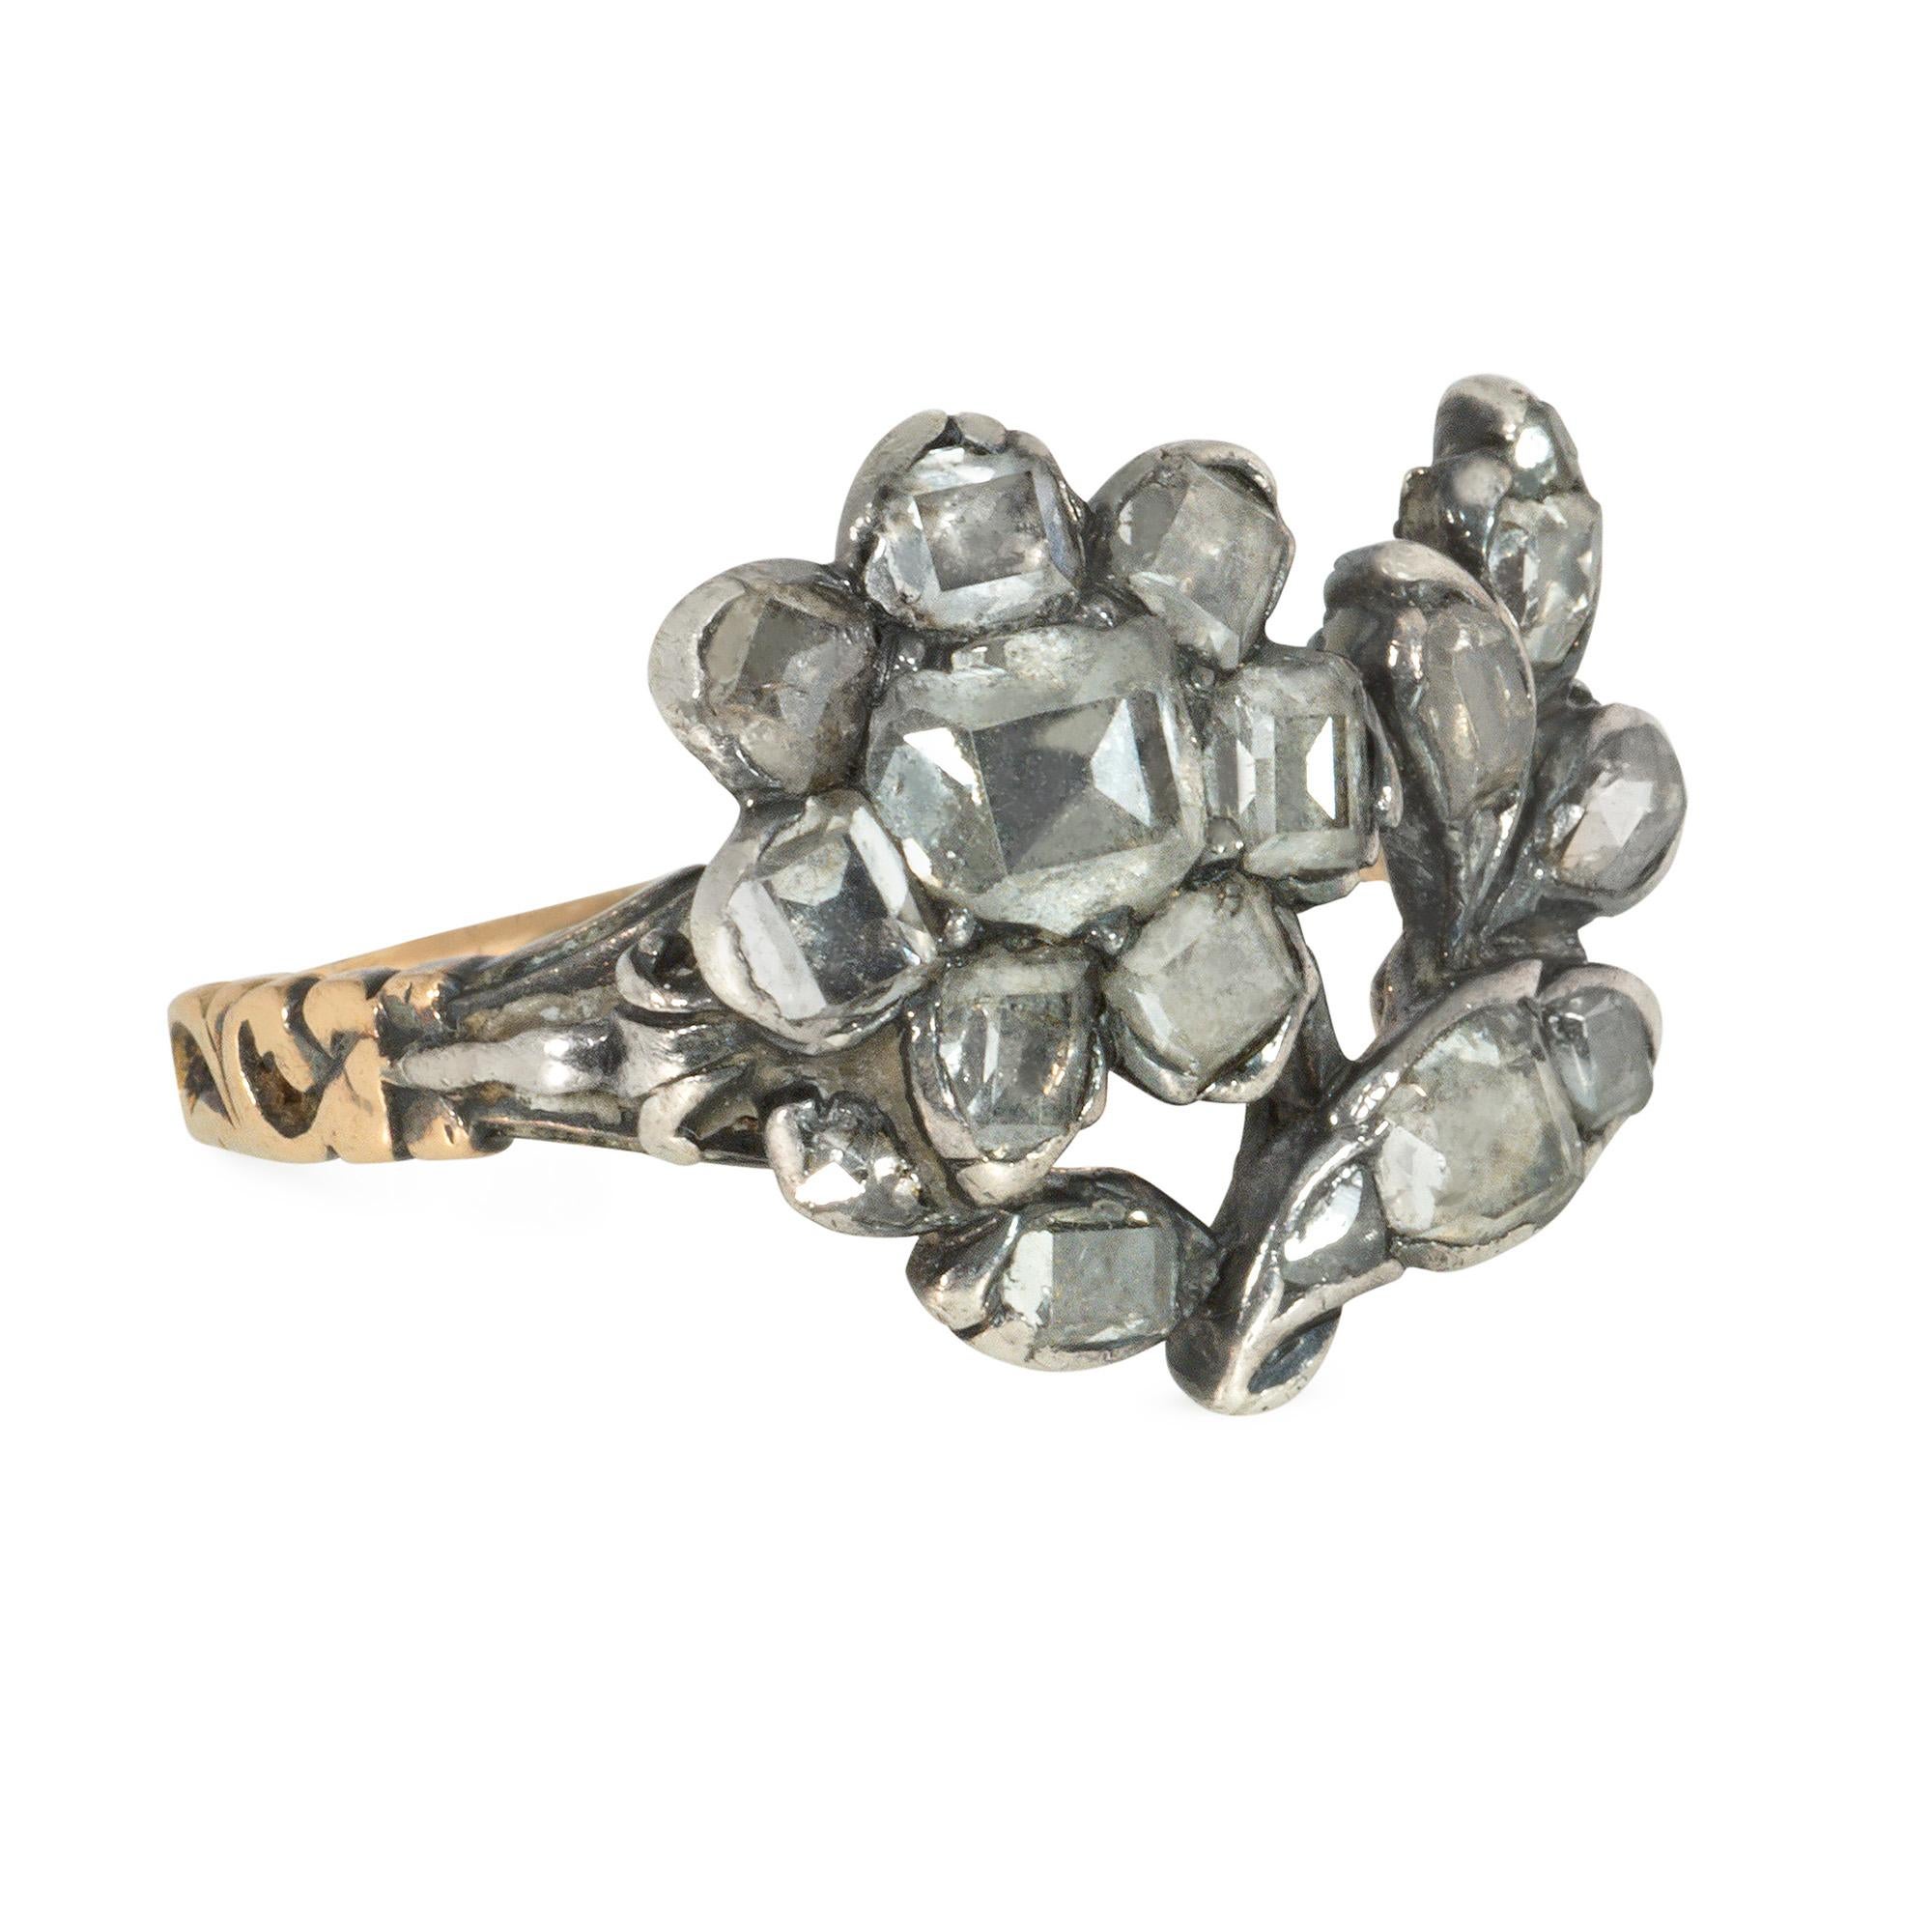 An antique Georgian period table-cut diamond giardinetto ring in the form of a flower, in sterling silver and 18k gold. France